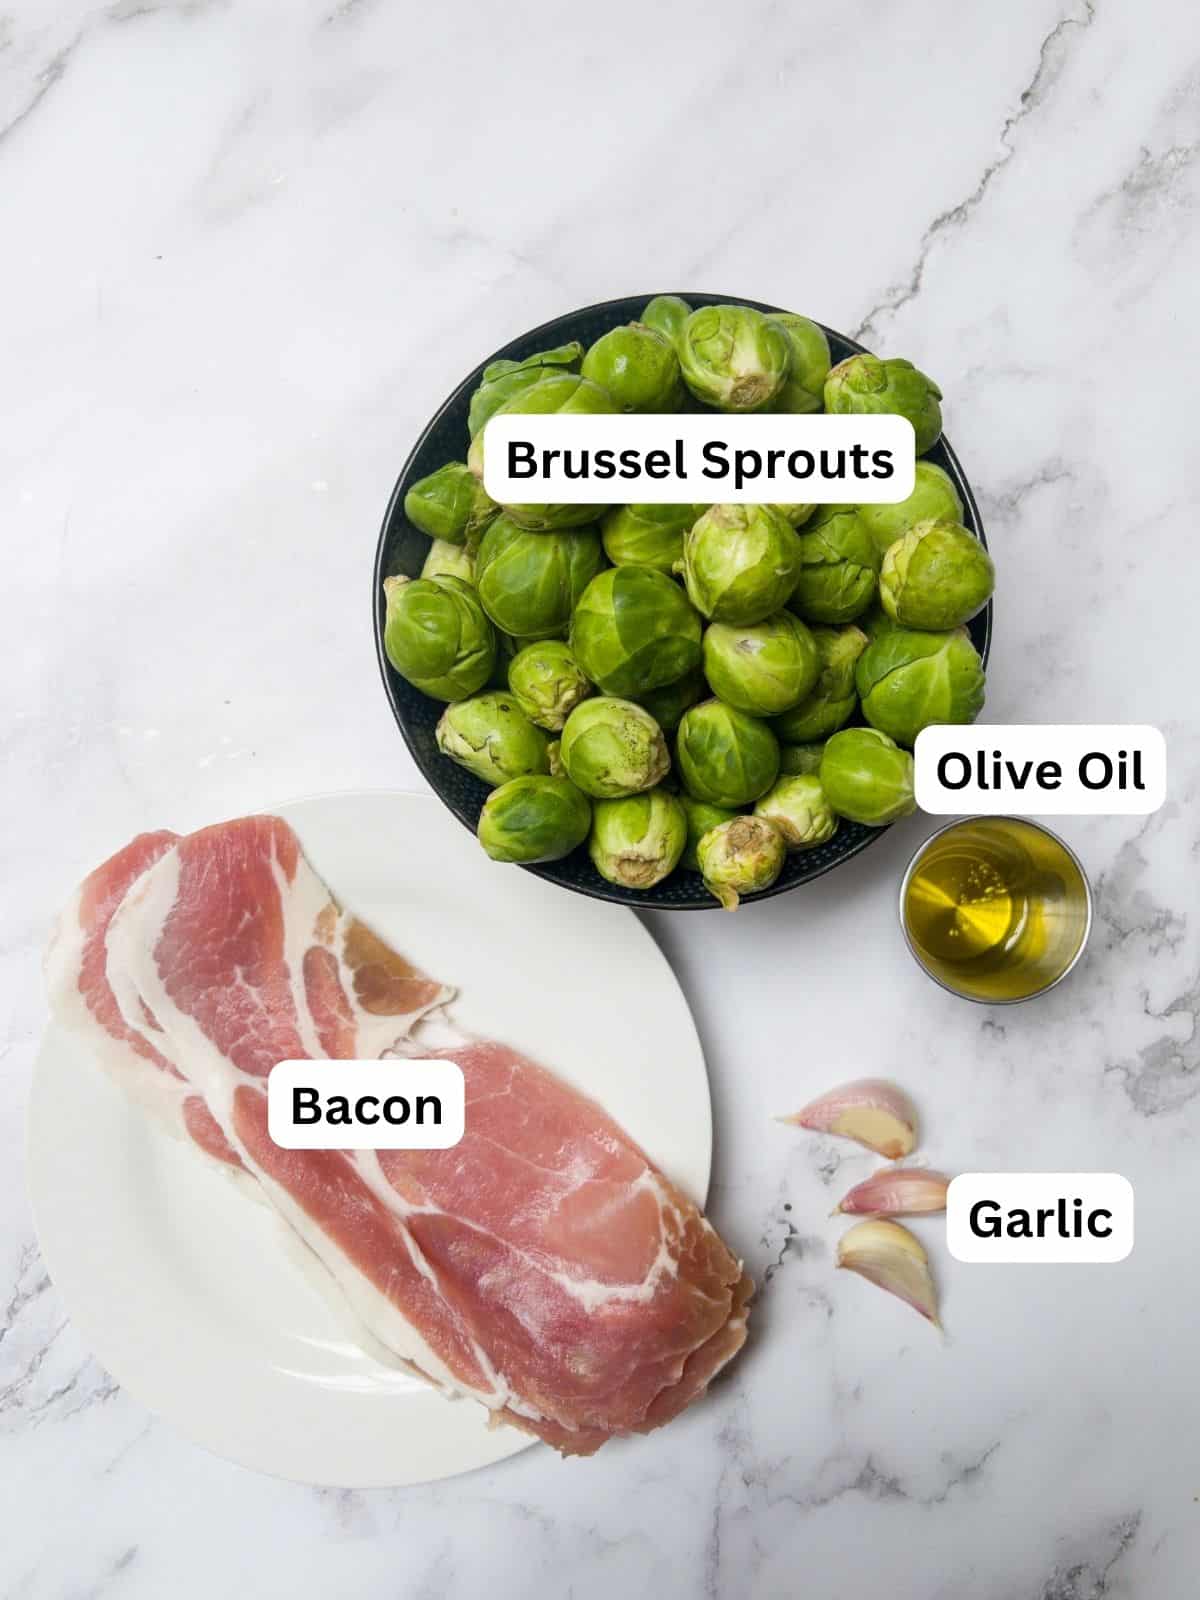 Ingredients laid out for Christmas brussel sprouts.